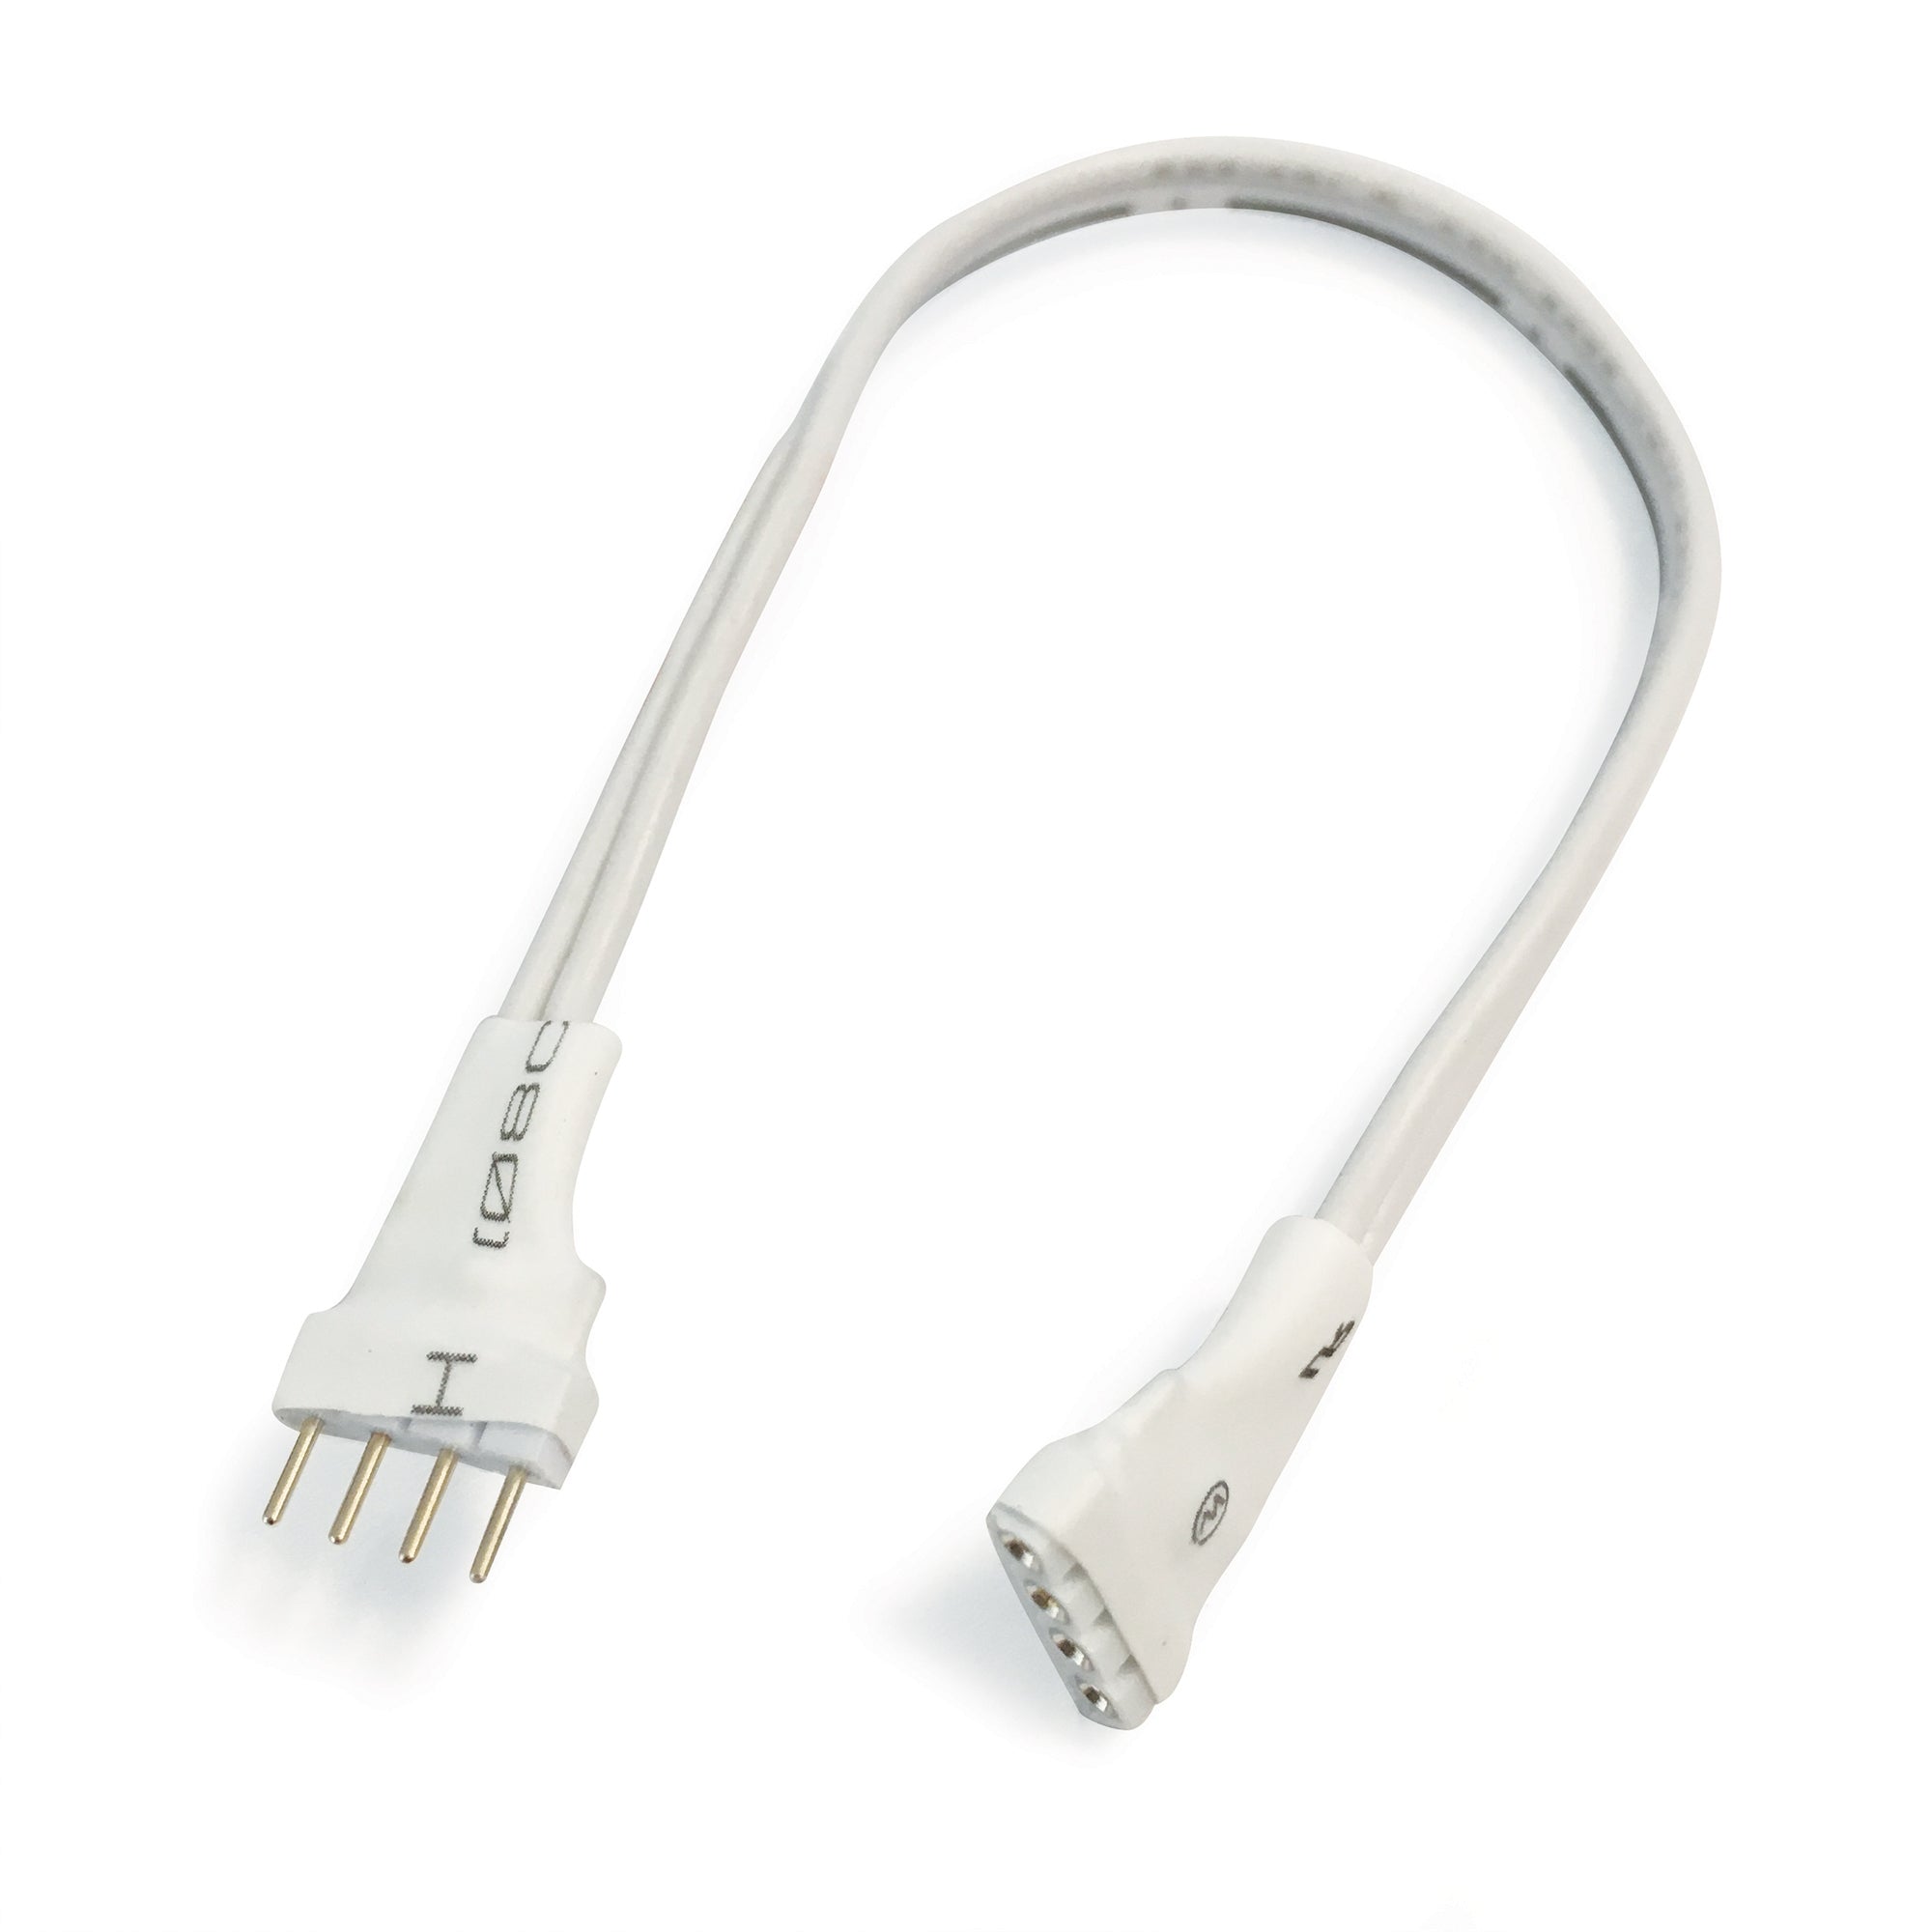 Nora Lighting NARGBW-902W 2" Interconnection Cable For RGBW Tape Light - White